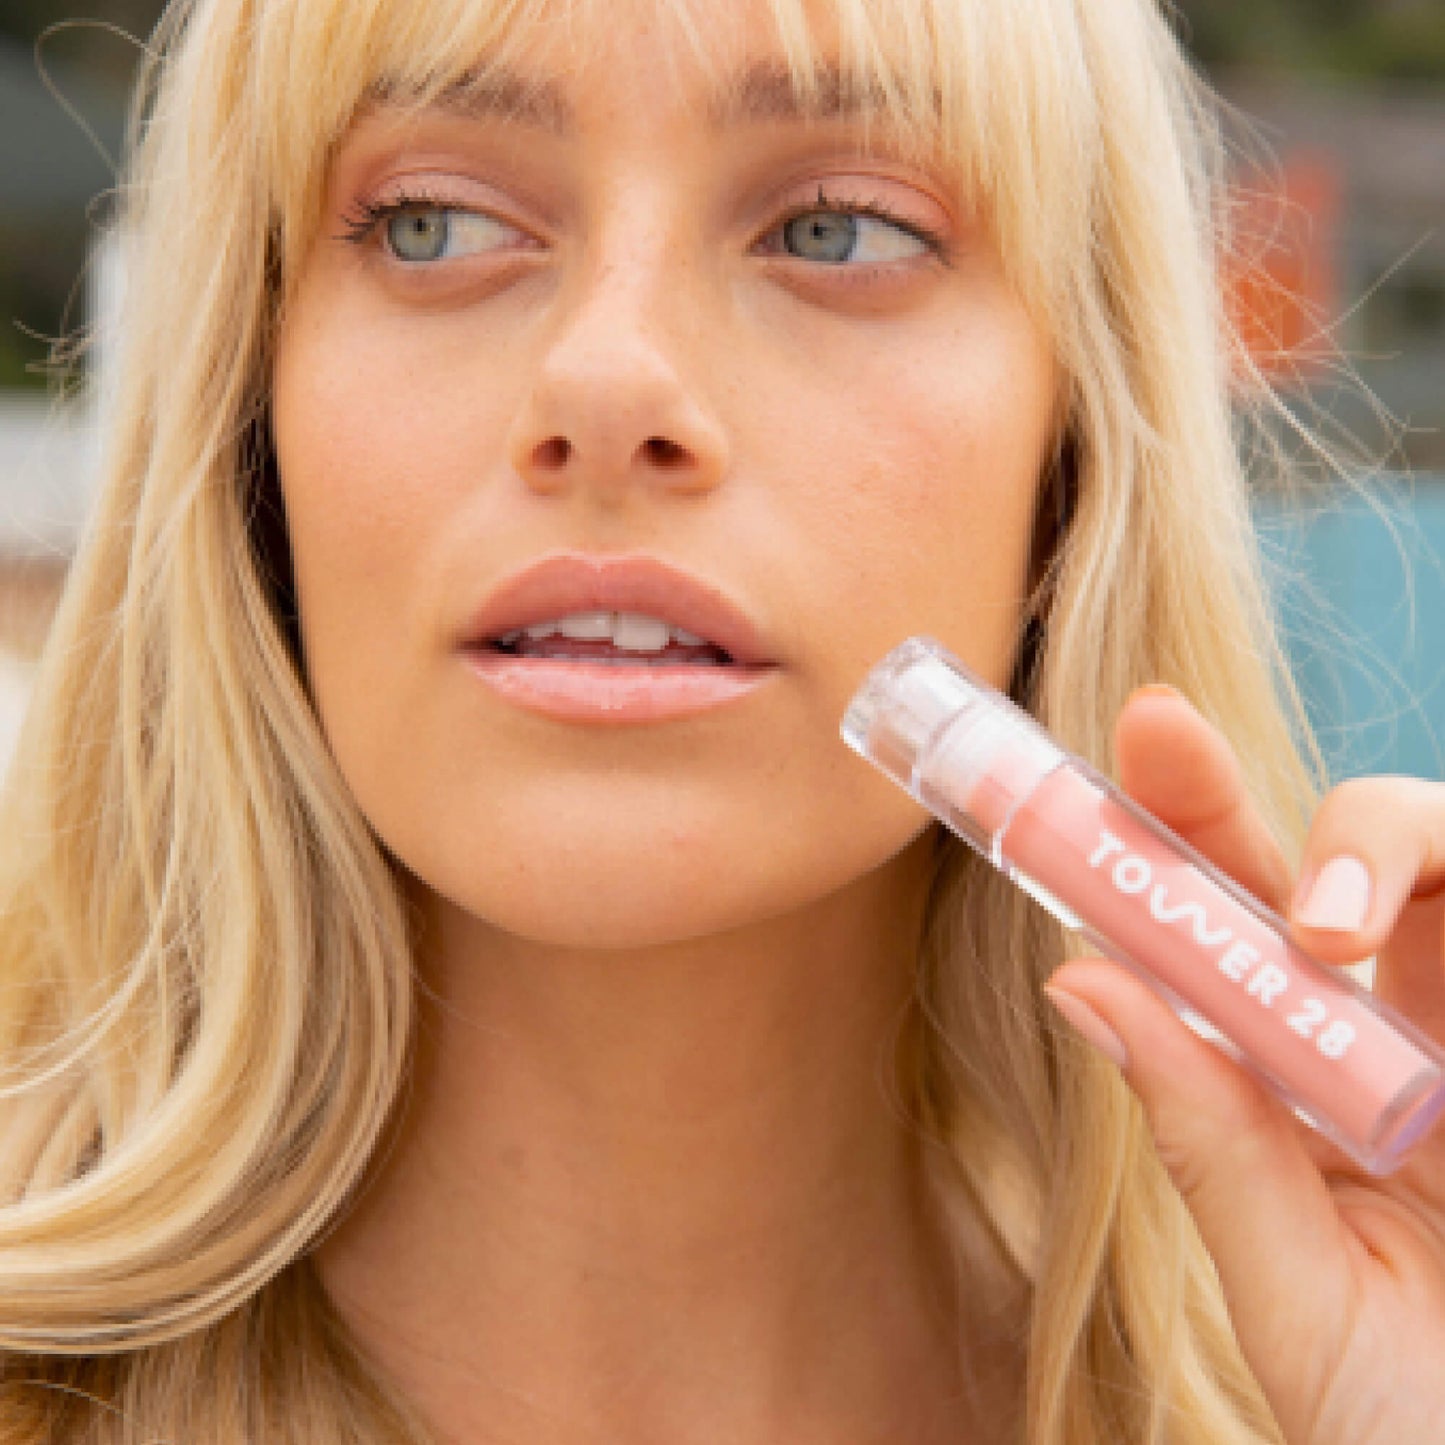 Oat [A model wearing the Tower 28 Beauty ShineOn Lip Jelly in the shade Oat on her lips]